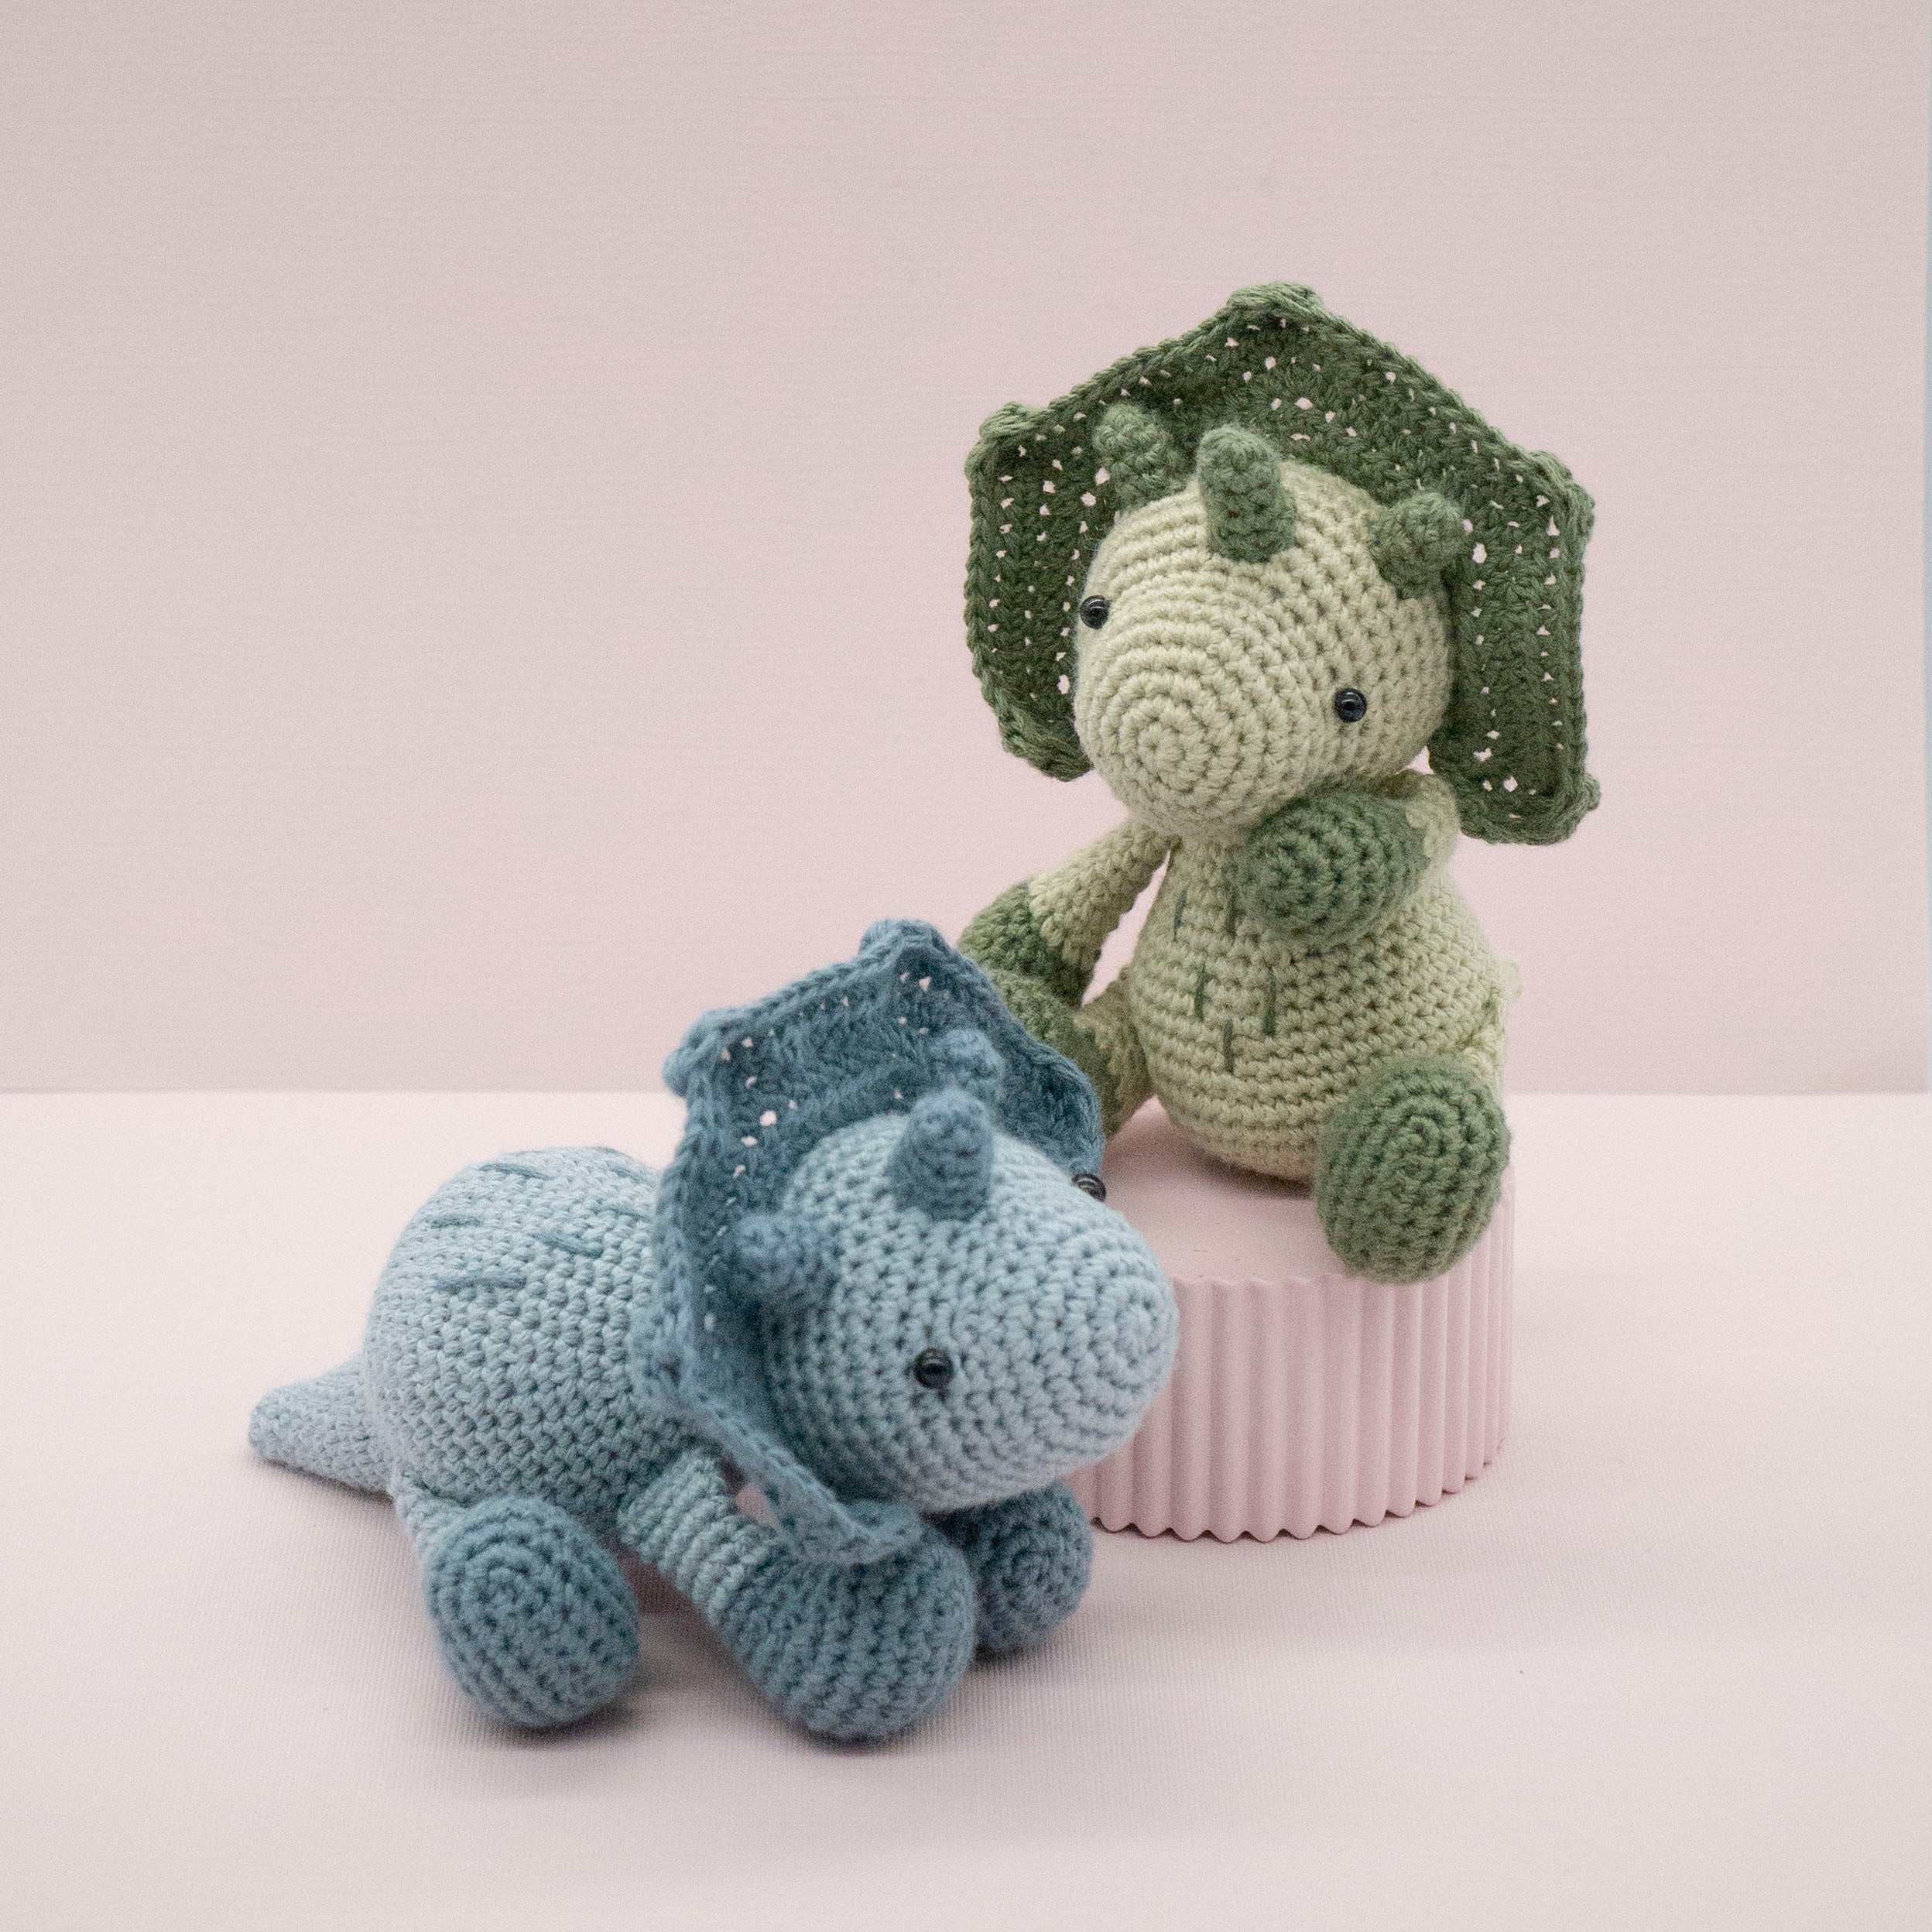 Crochet Your Own Triceratops: Green Sitting